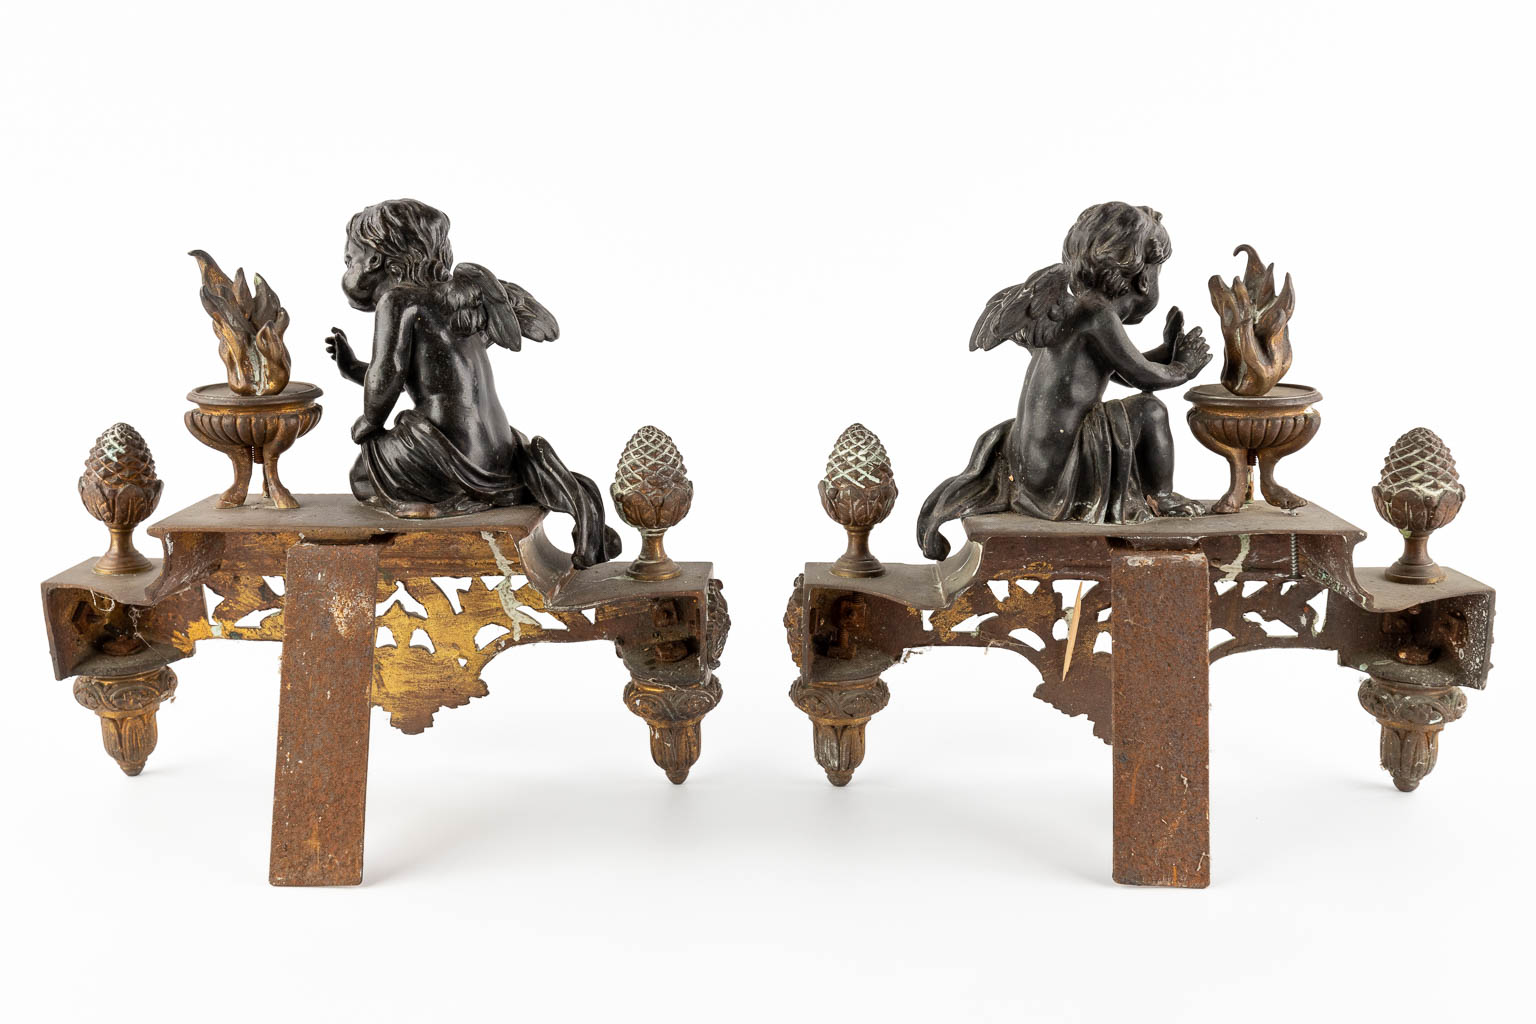 A pair of bronze fireplace andirons, gilt and patinated bronze, Louis XVI style. Circa 1900. (W:30 x H:27 cm)